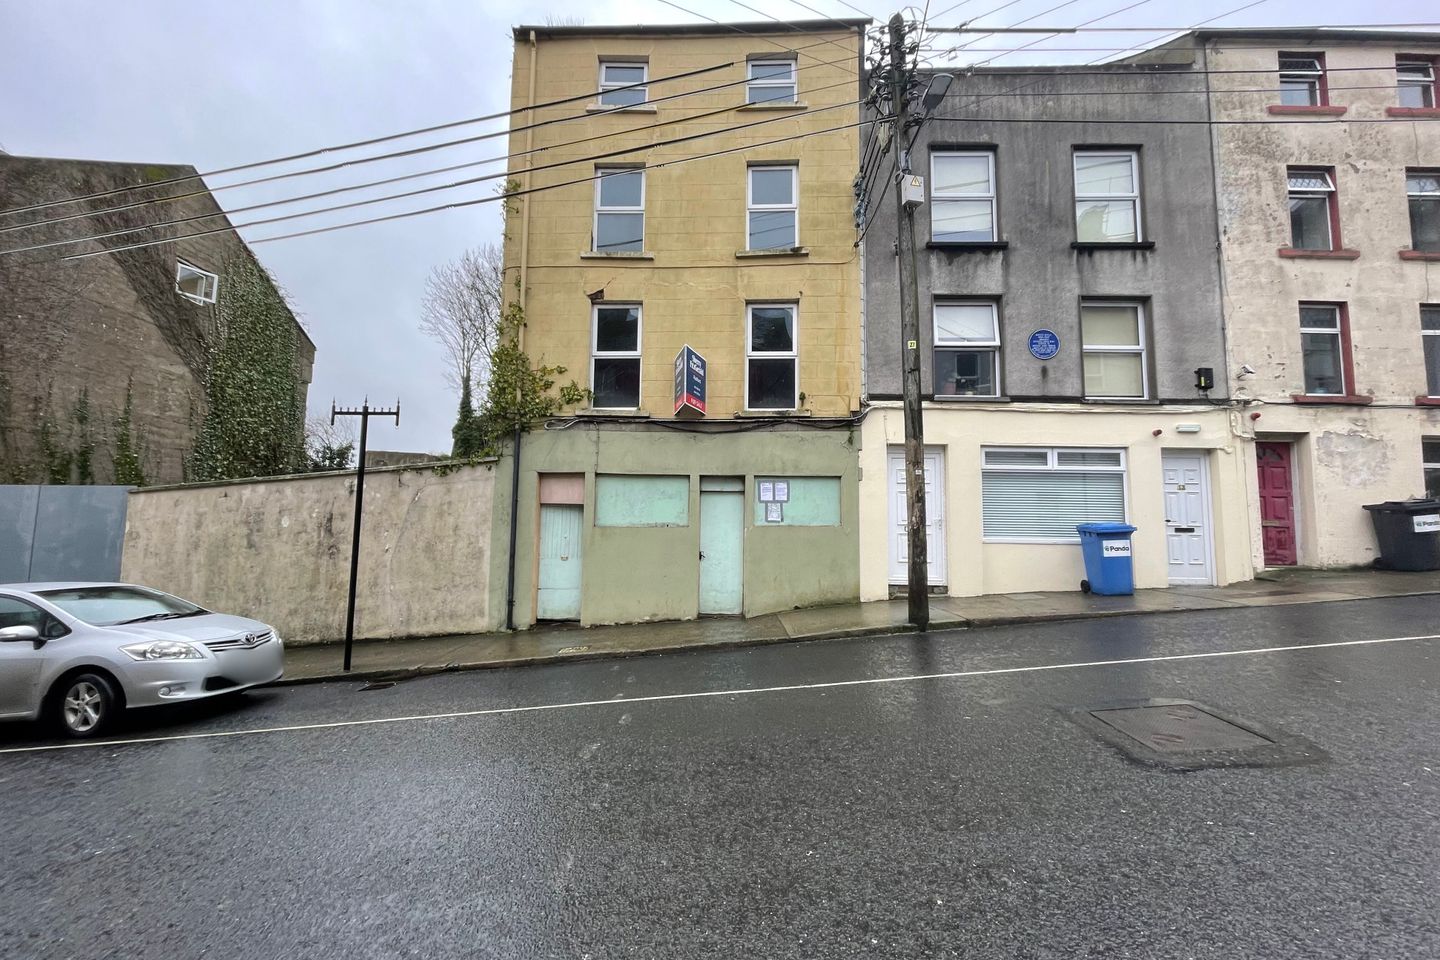 16/17 Mary Street, New Ross, Co. Wexford